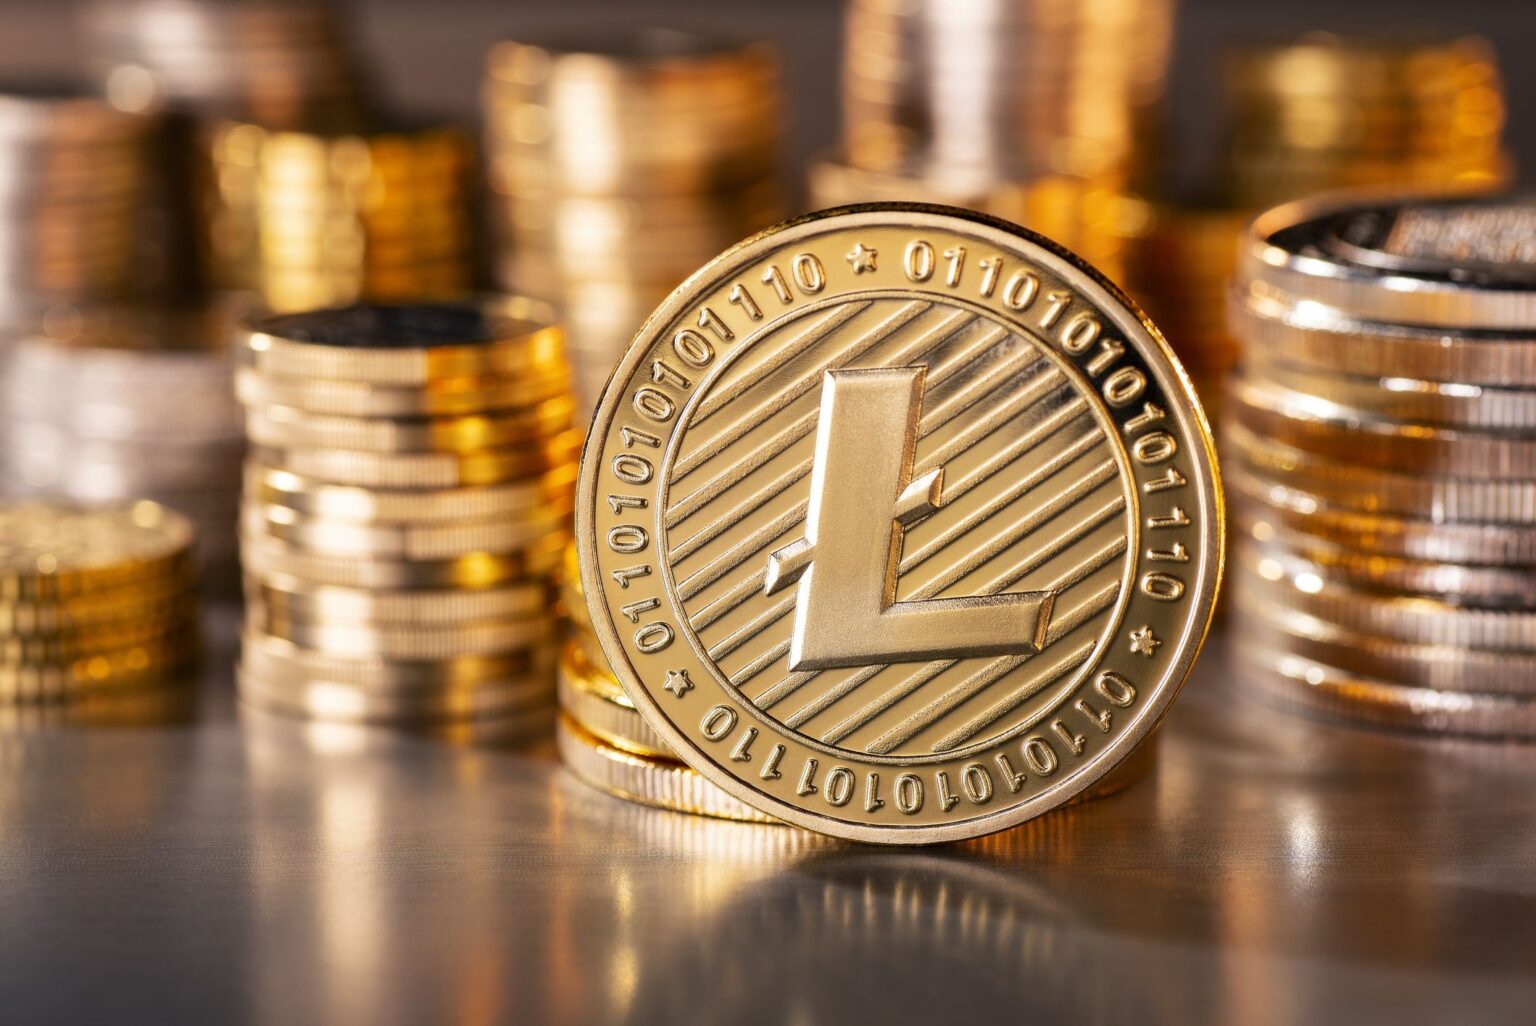 Litecoin price is mostly found to be related to the price movements of bitcoin. Should you invest today?